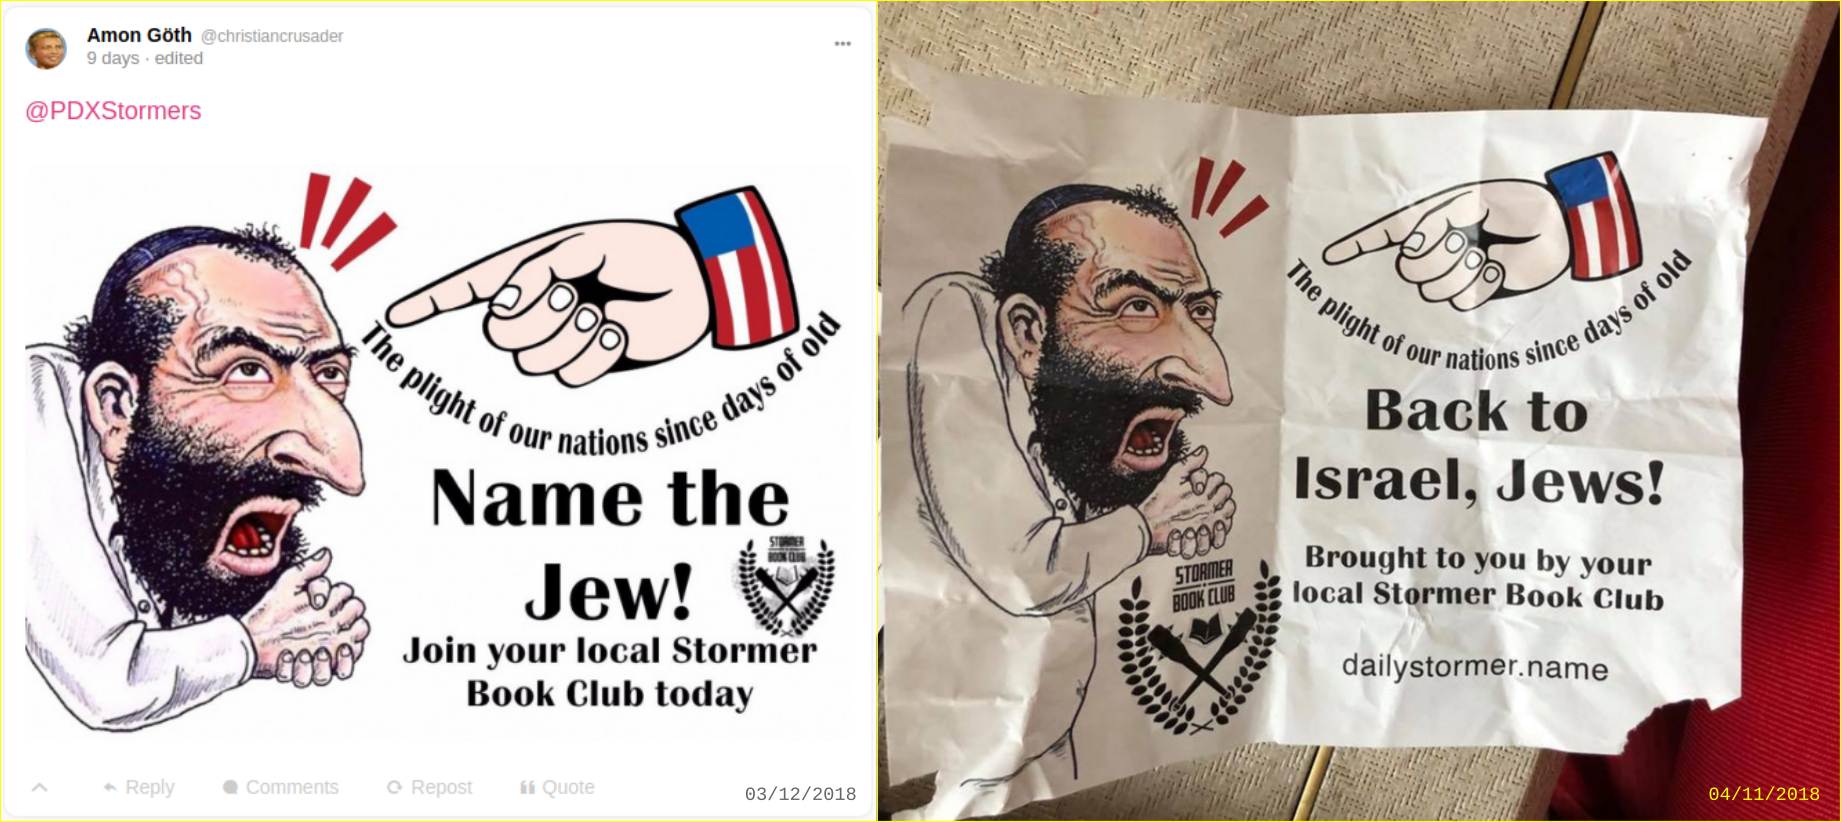 Anti-Semitic flyers posted by PDX Stormers at Chabad center PDX